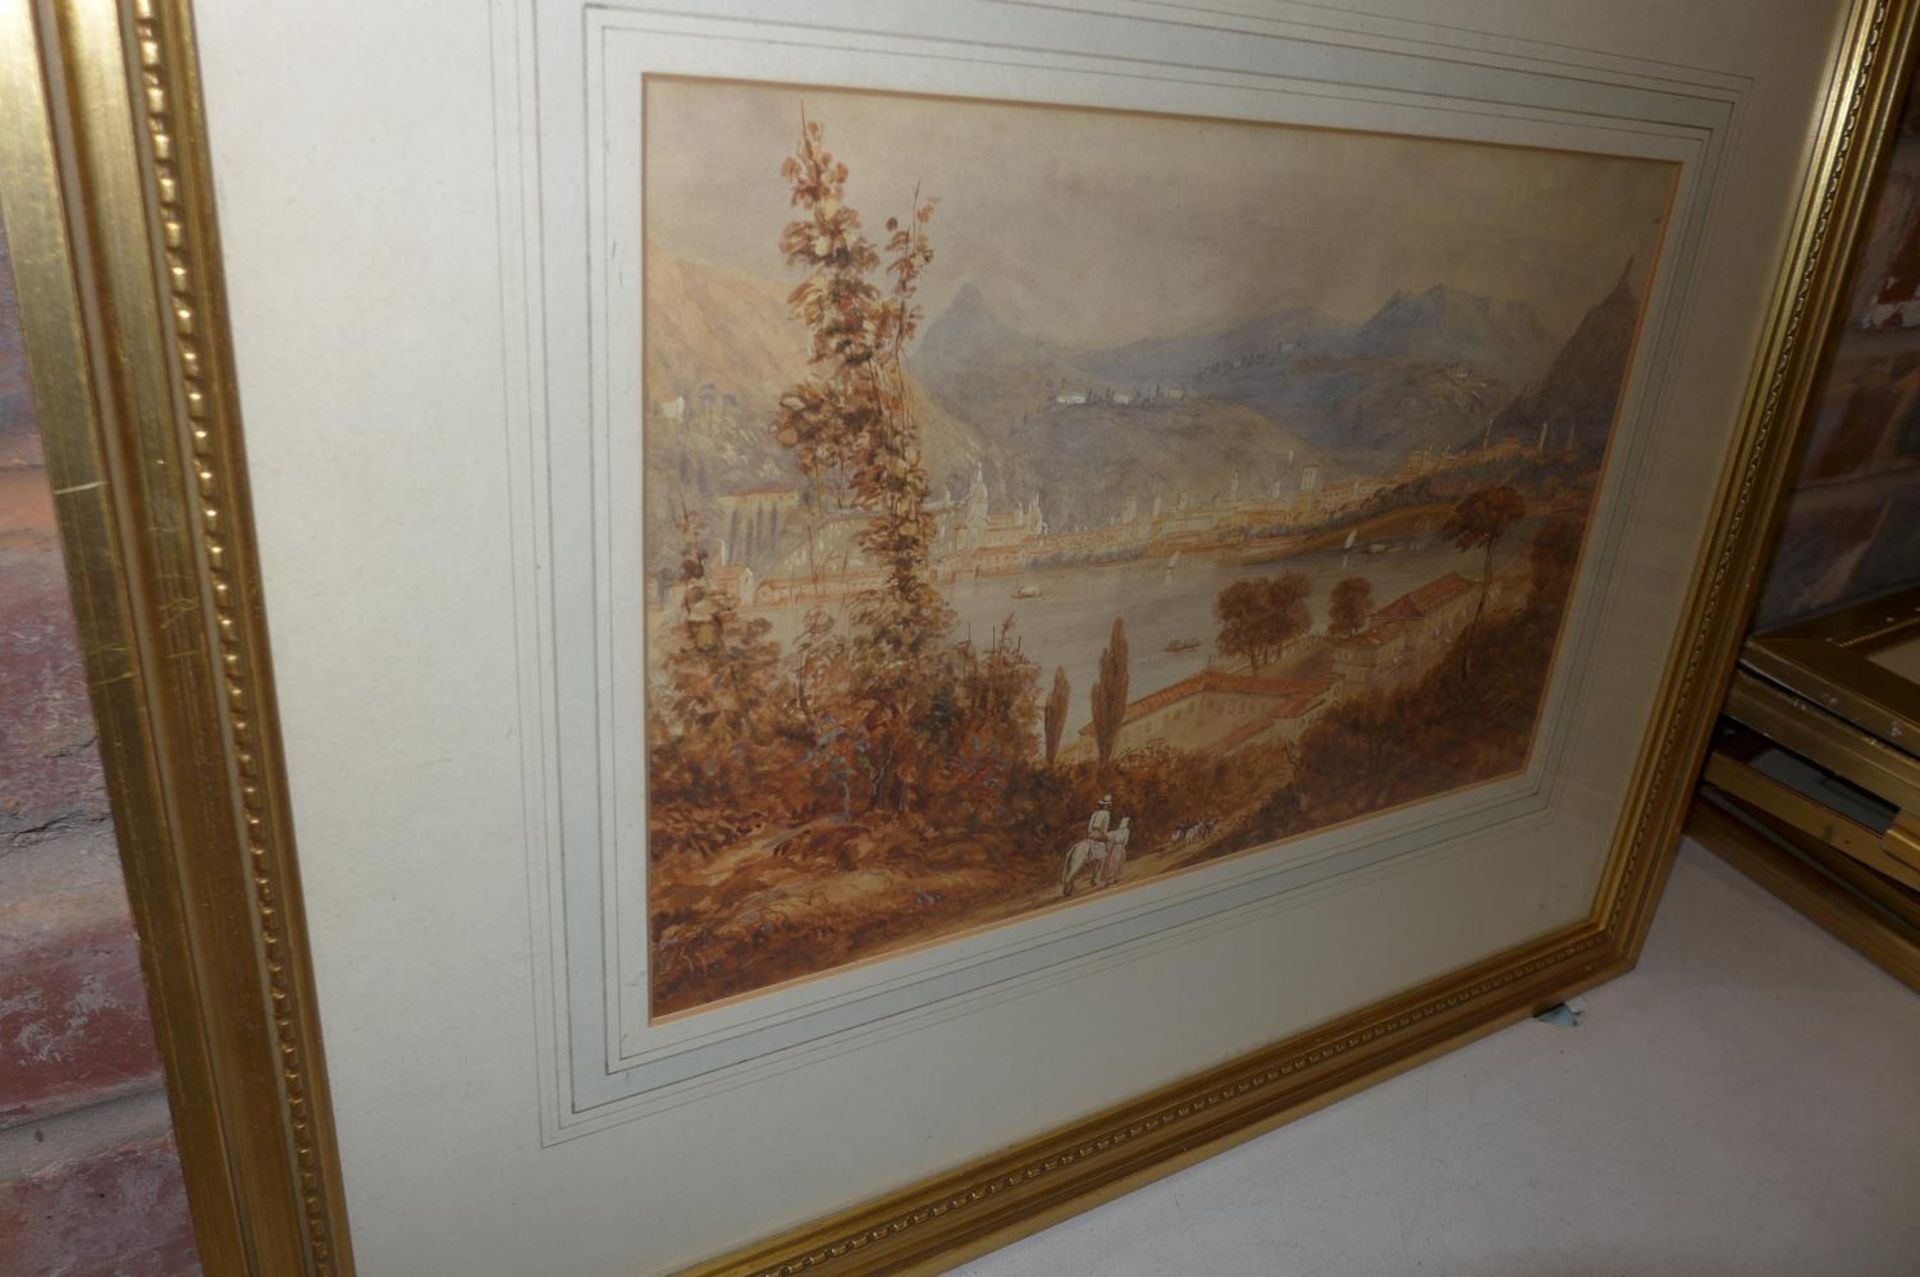 A LATE 19TH/EARLY 20TH CENTURY WATERCOLOUR OF A CONTINENTAL LAKE SCENE, 23X36CM - Image 2 of 3